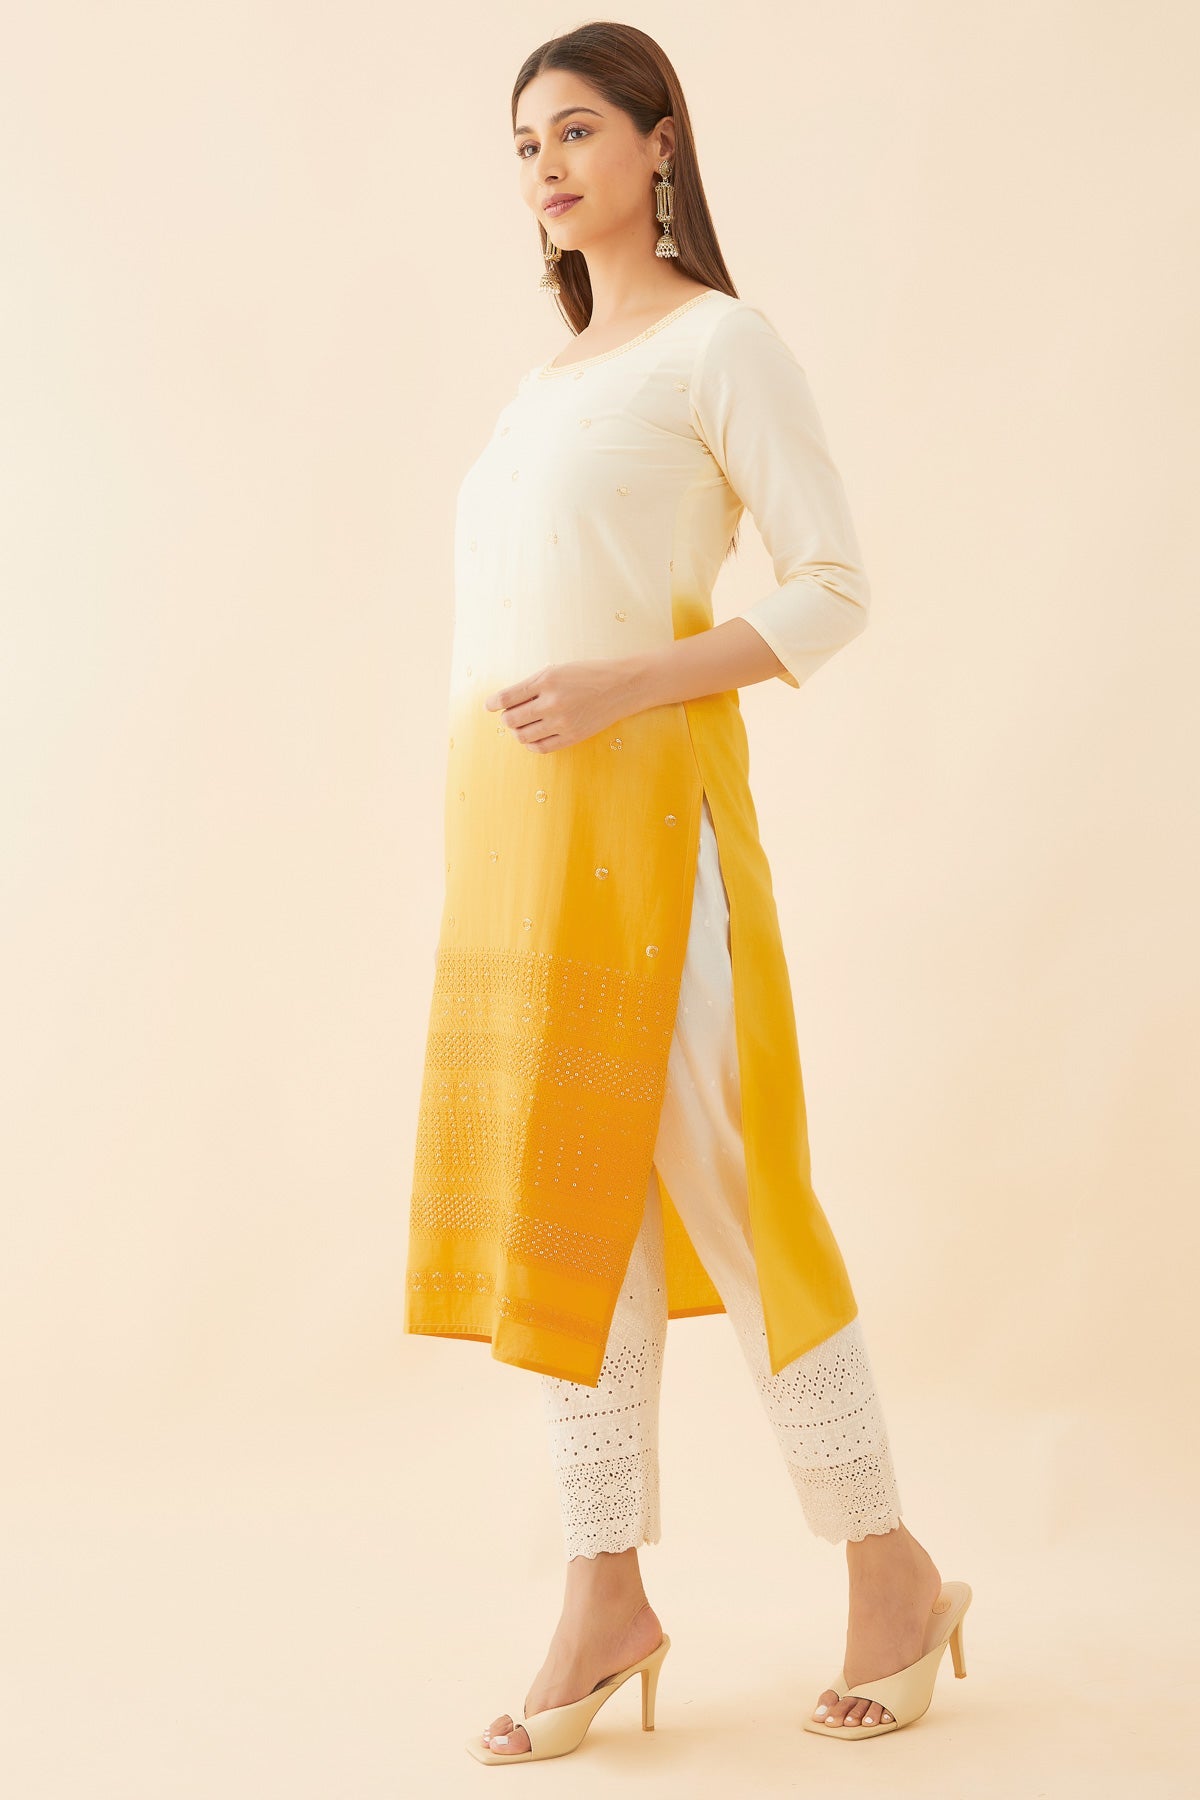 All Over Sequence & Embroidered Ombre Kurta - Mustard